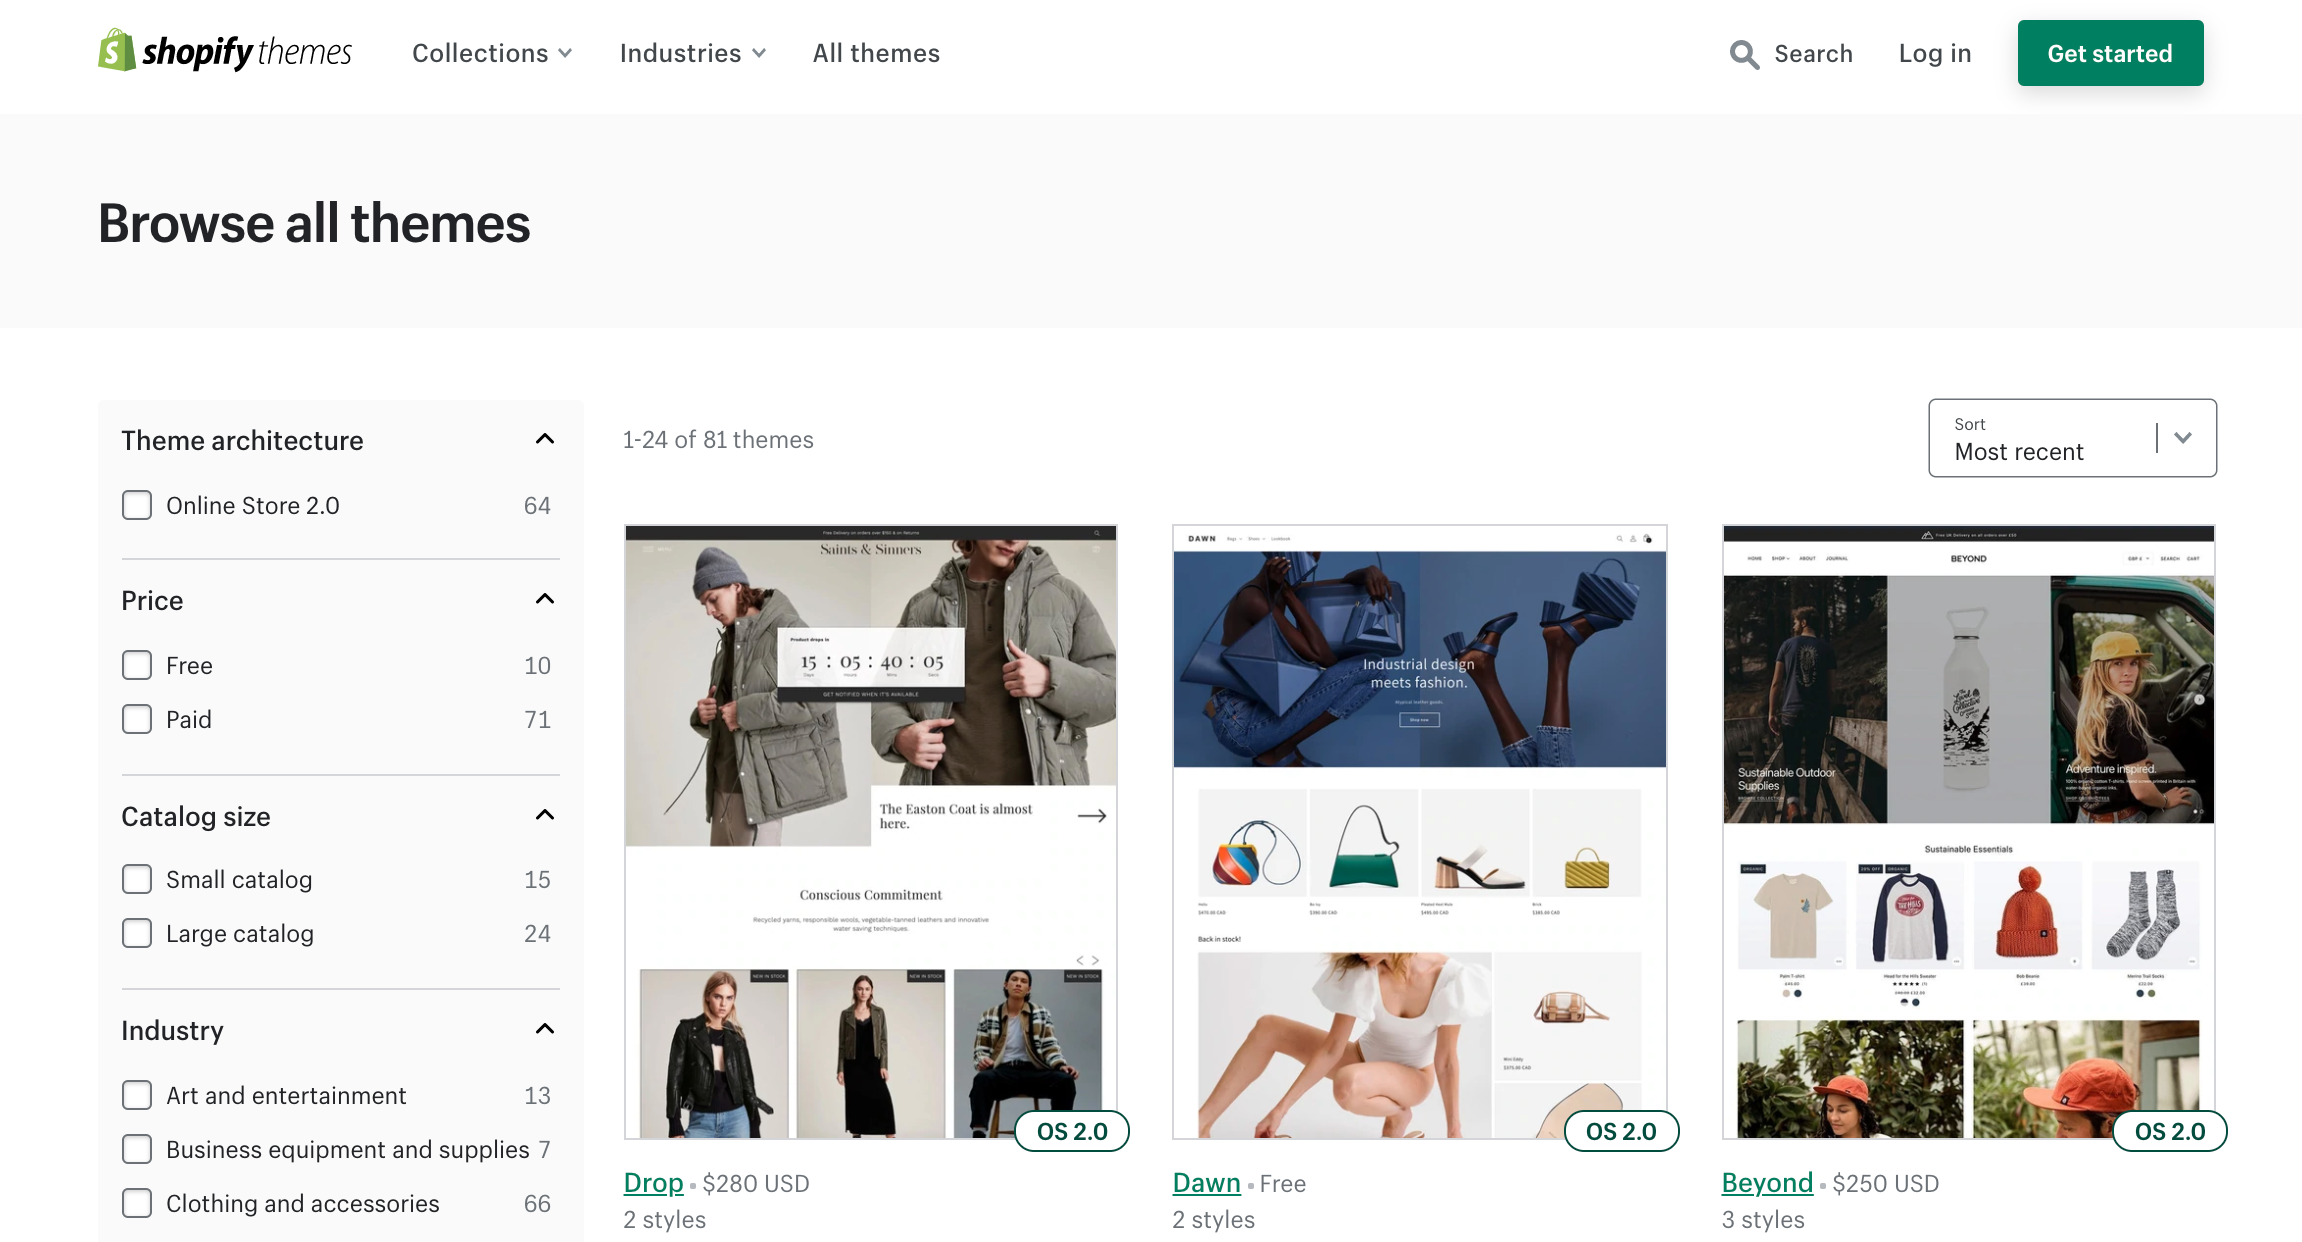 shopify's ecommerce themes